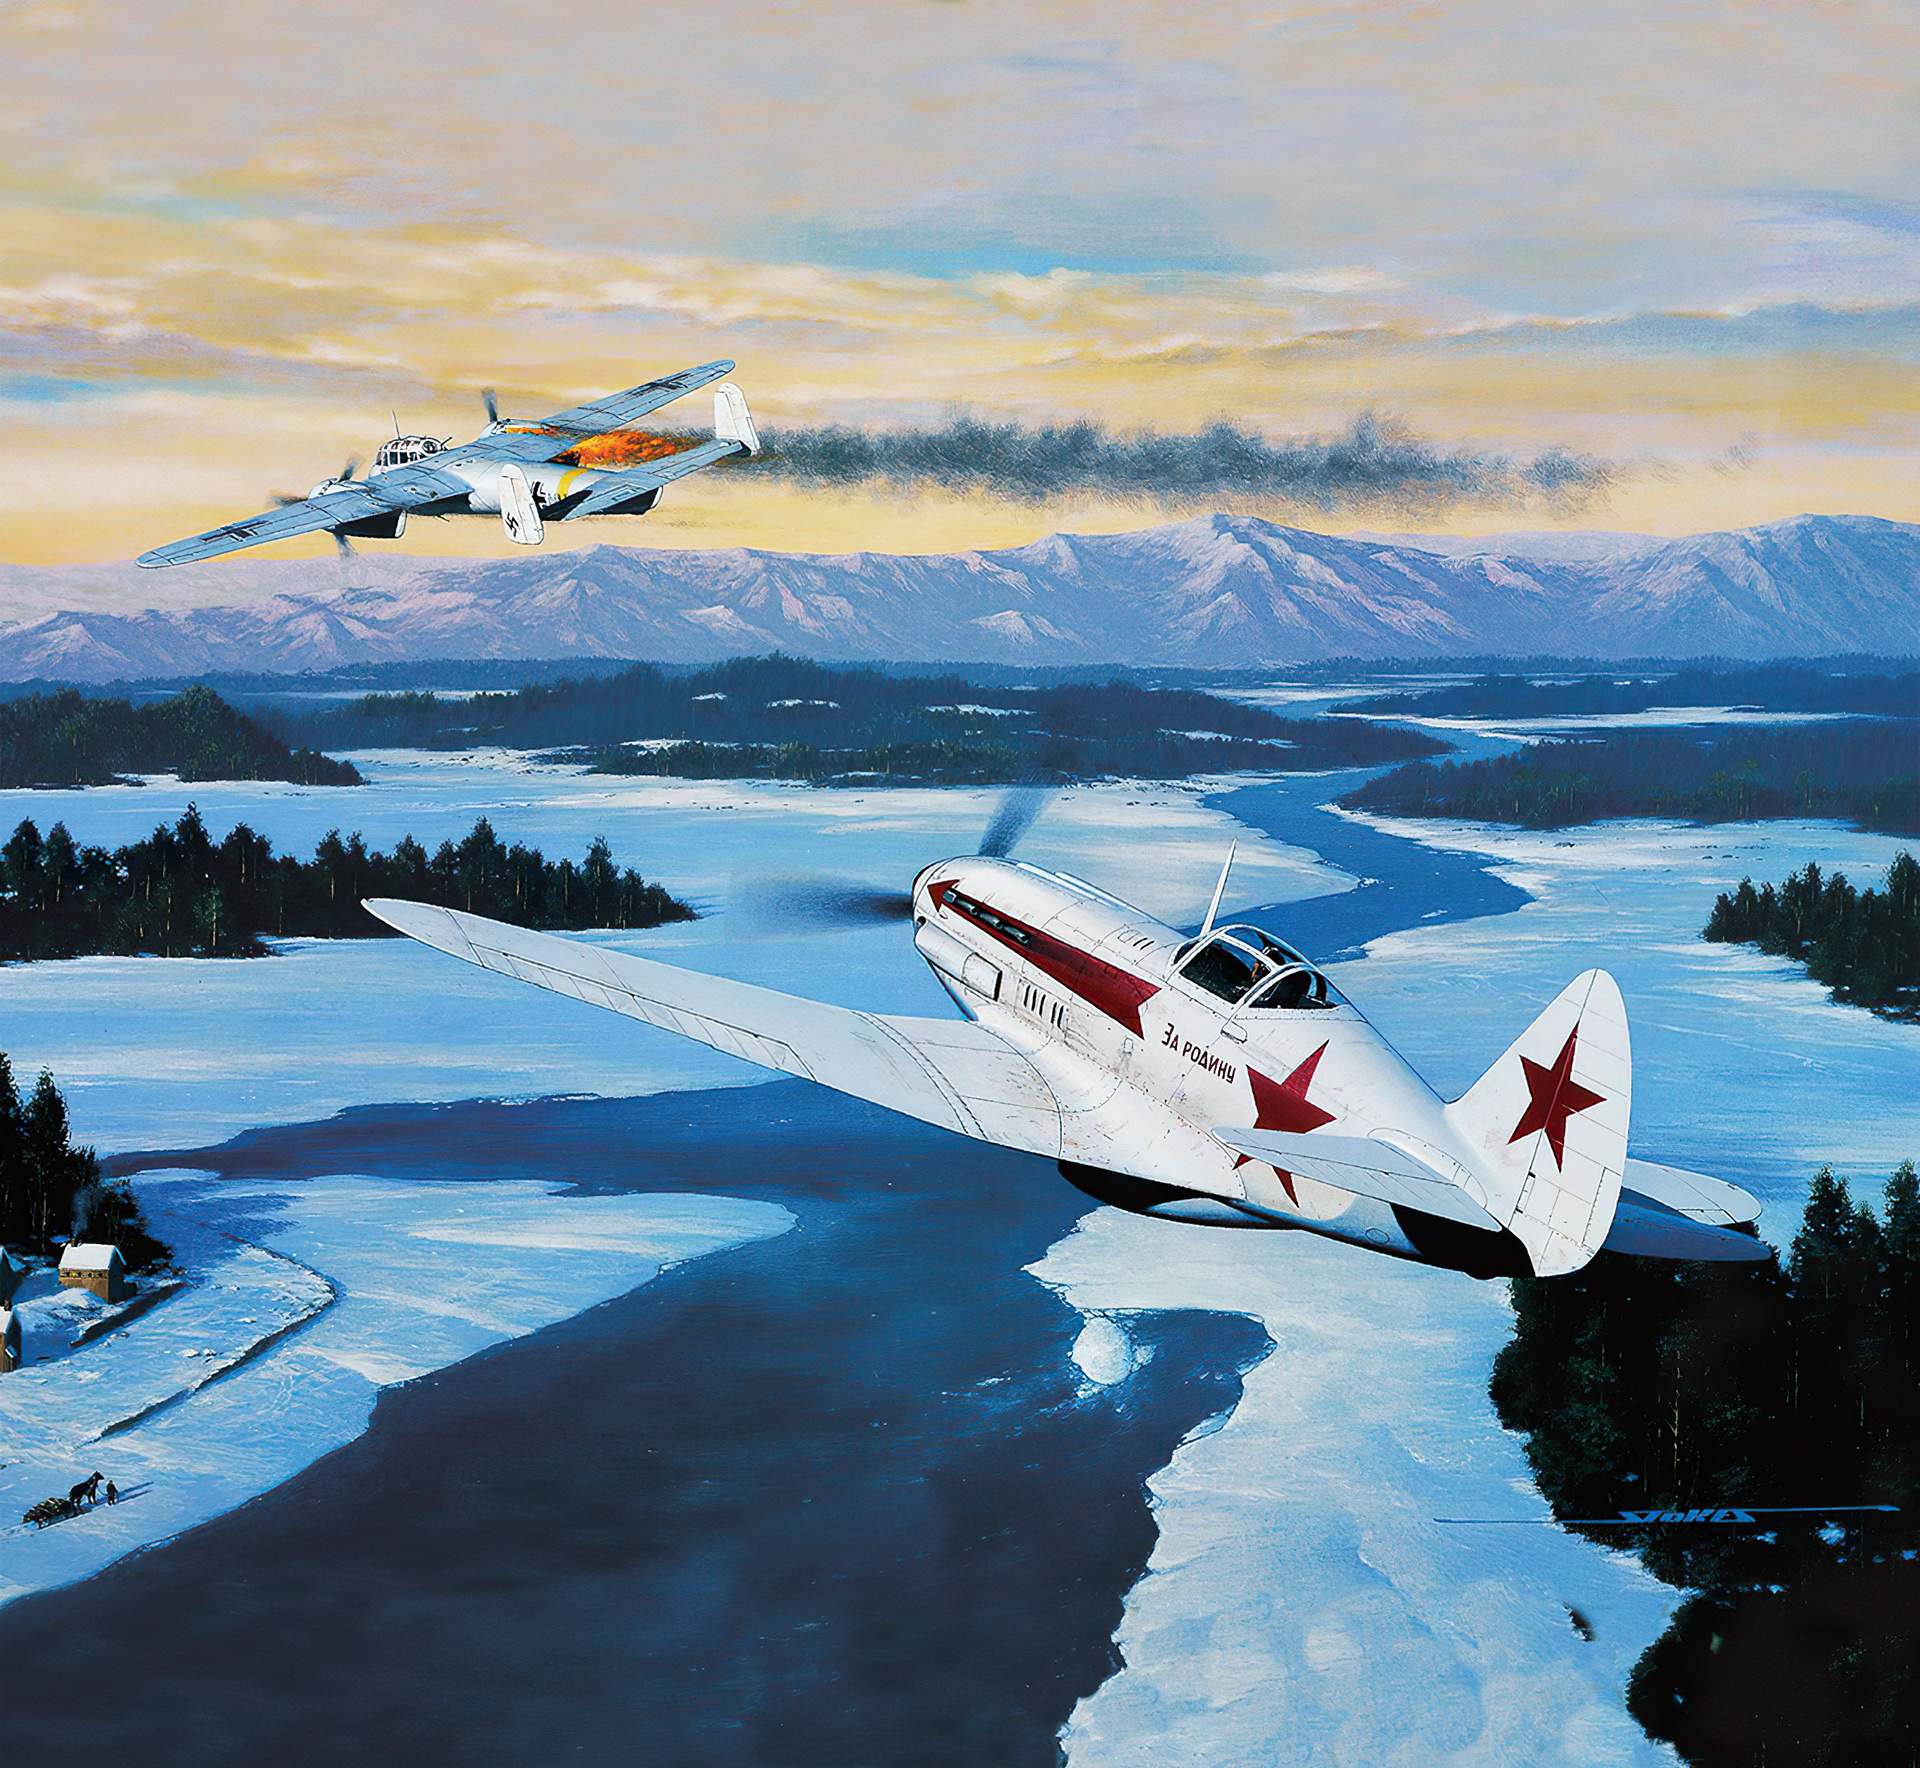 General 1920x1768 aircraft flying fire snow ice military army military aircraft sky clouds smoke mountains landscape World War II Luftwaffe Soviet Air Forces MiG 3 Dornier Do 17 signature Stan Stokes